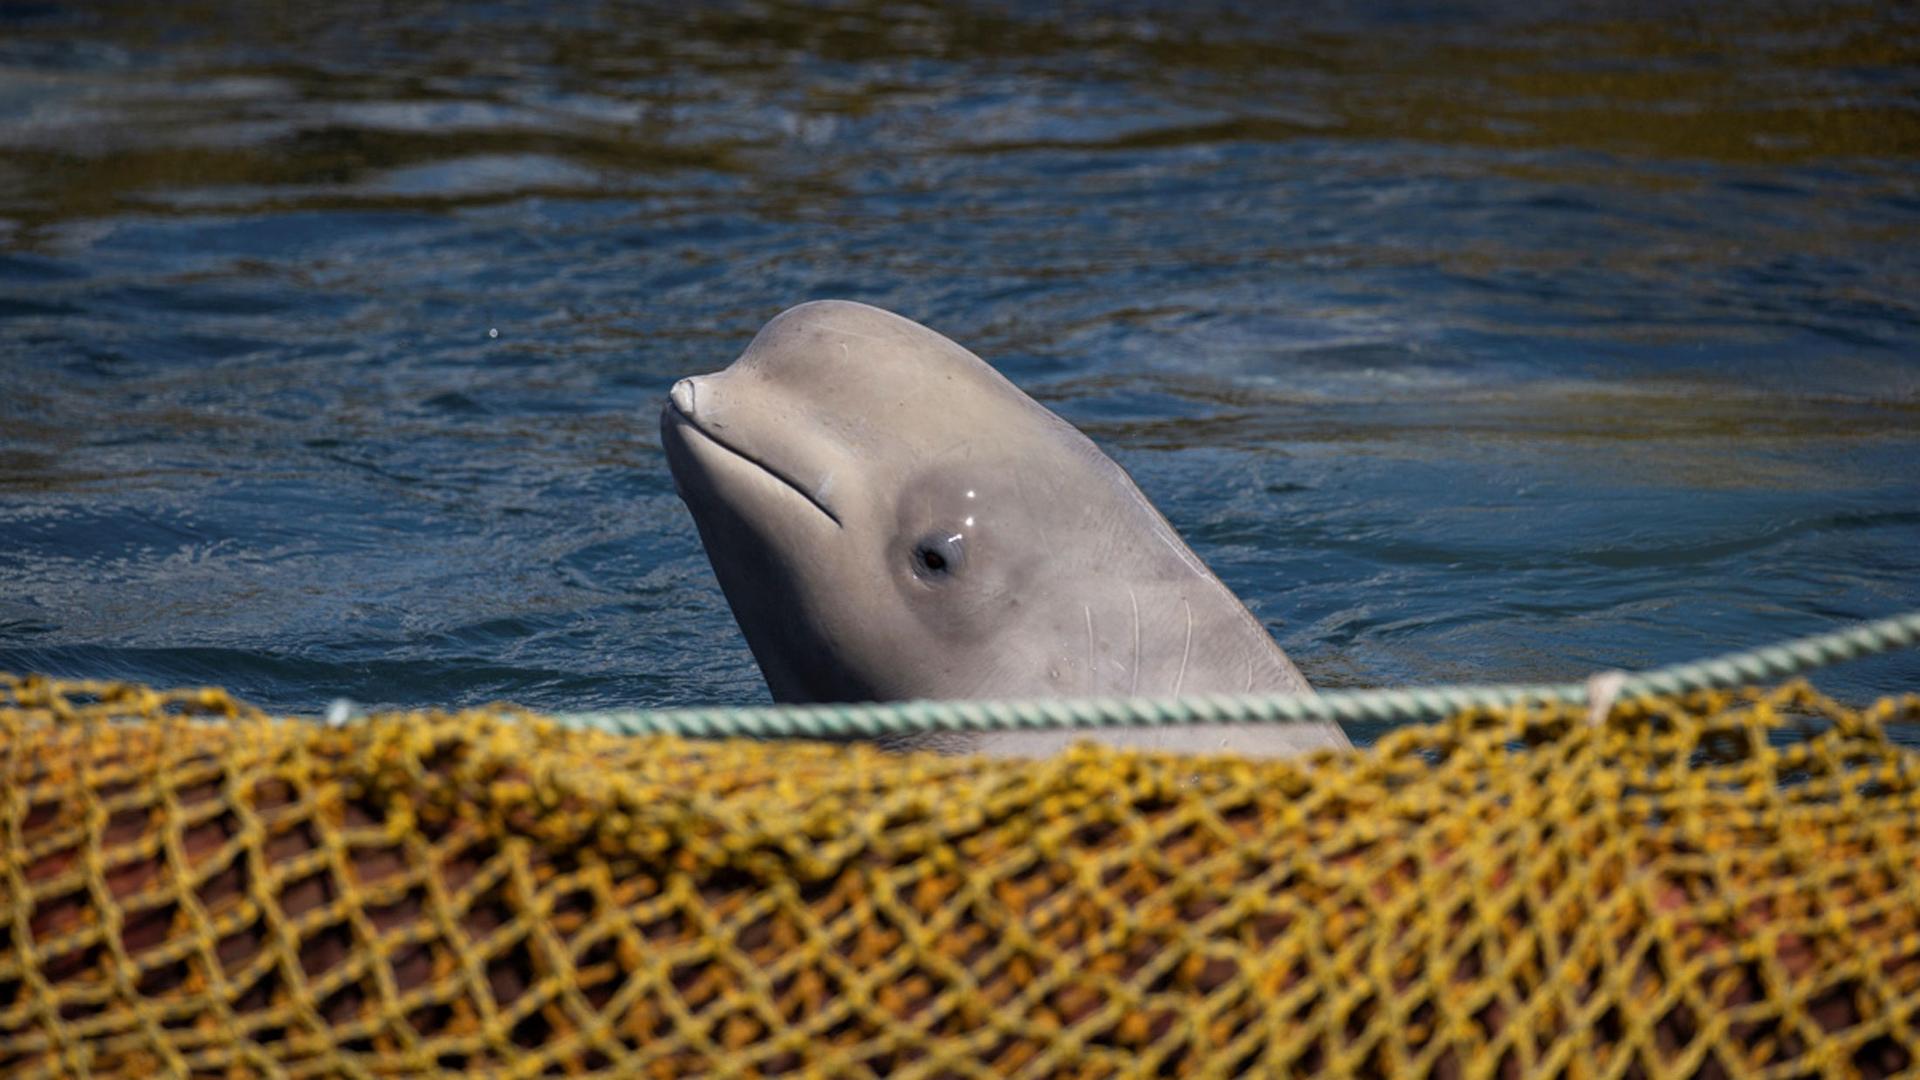 A beluga whale surfaces out of the water near a yellow net